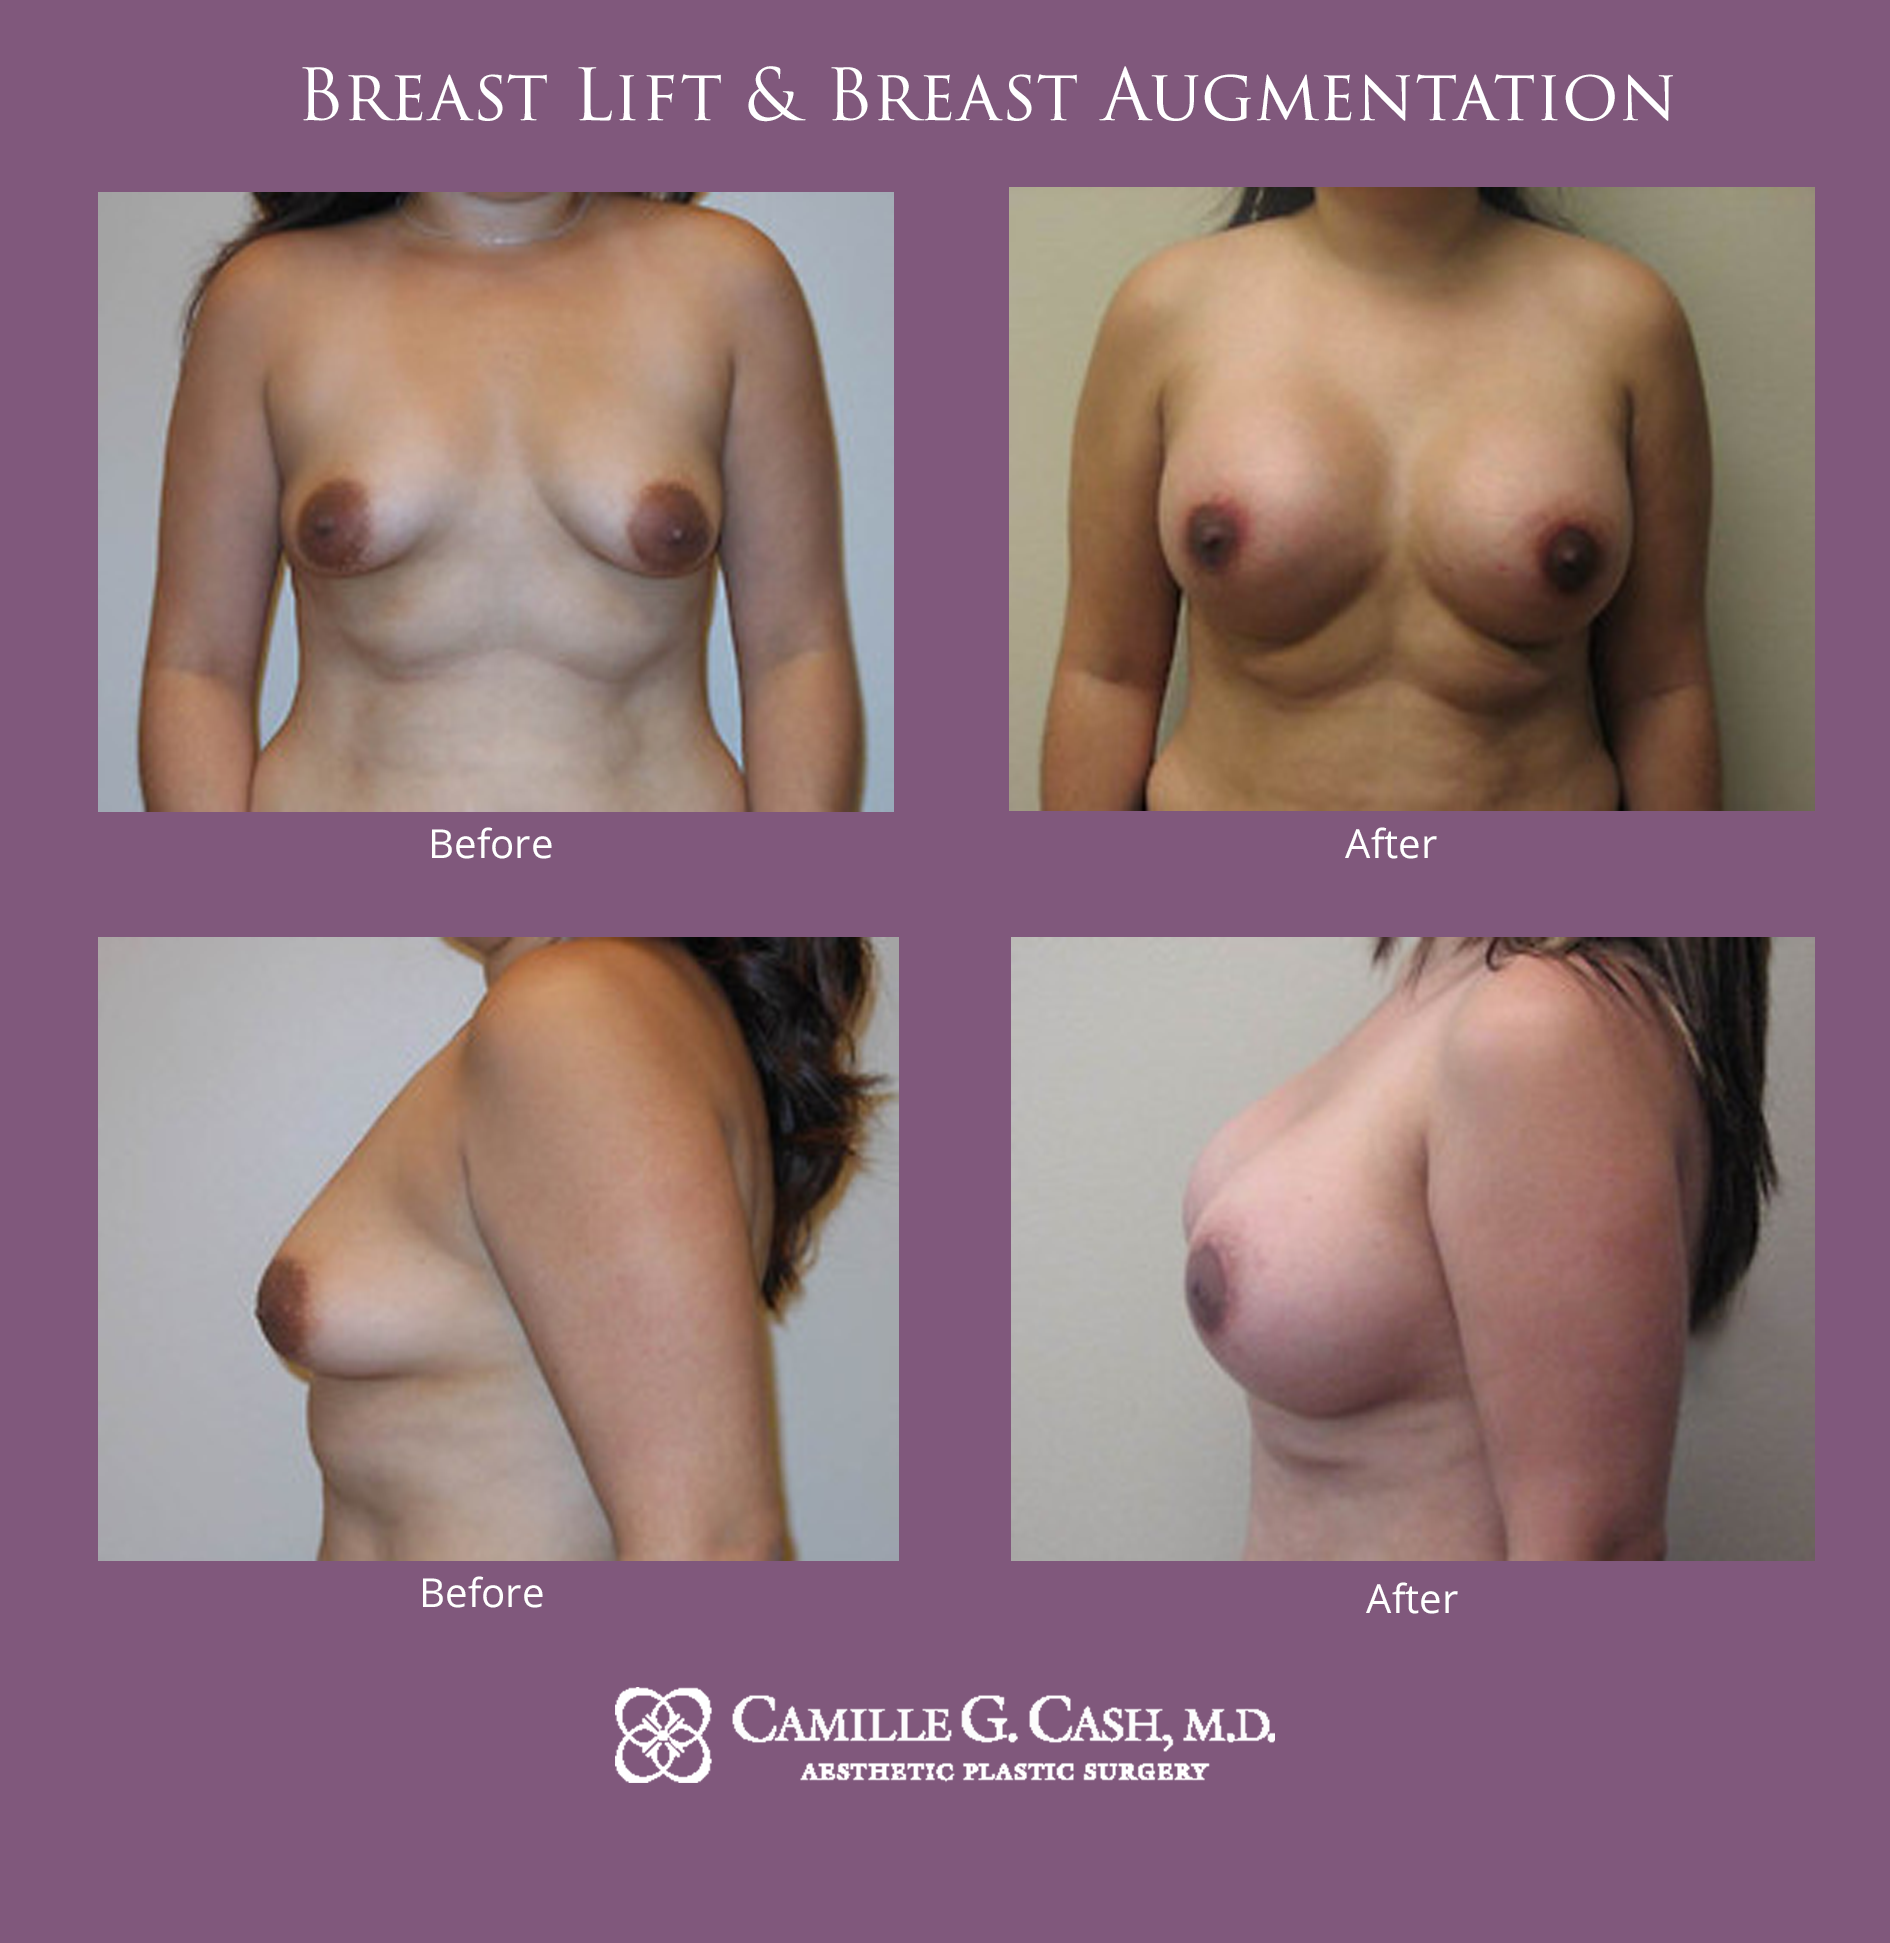 Breast lift with implants before and after photos